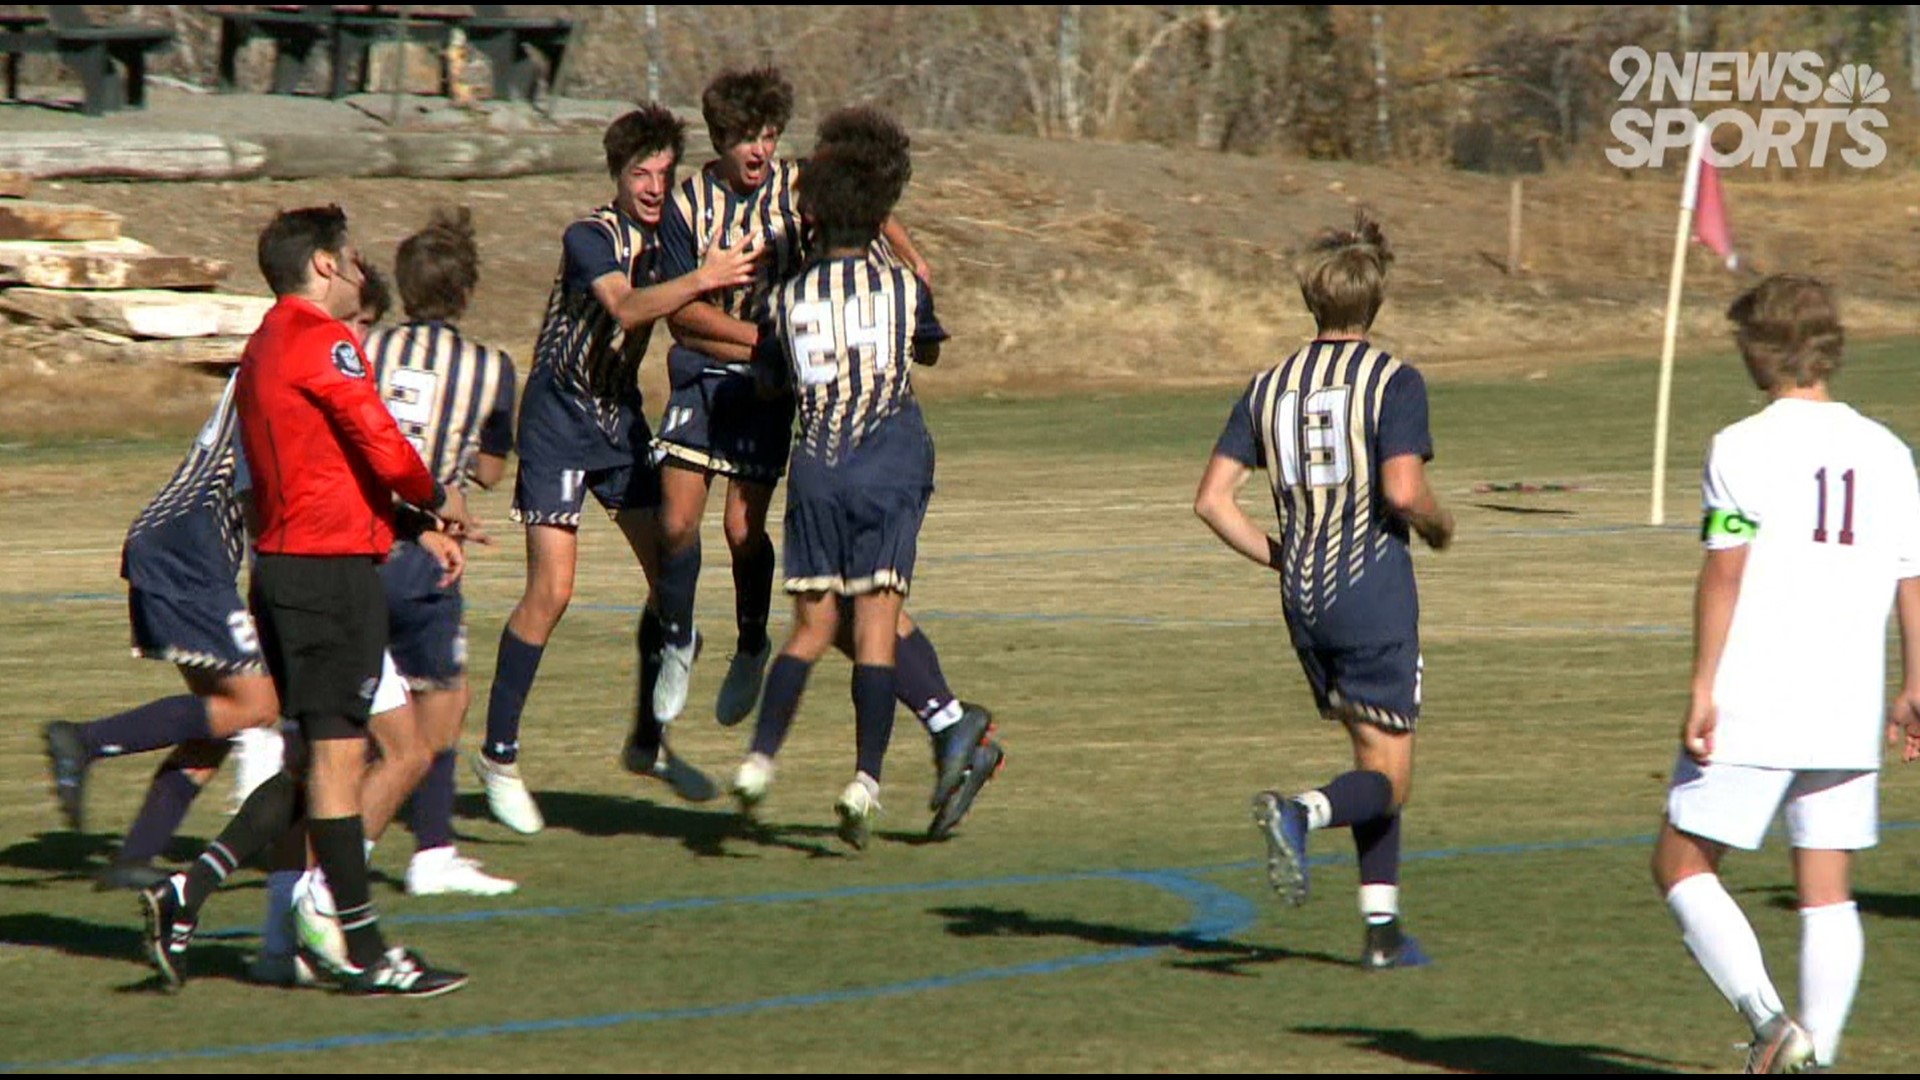 The Mustangs blanked the Red-Tailed Hawks 4-0 Saturday to advance to the Class 4A semifinals.